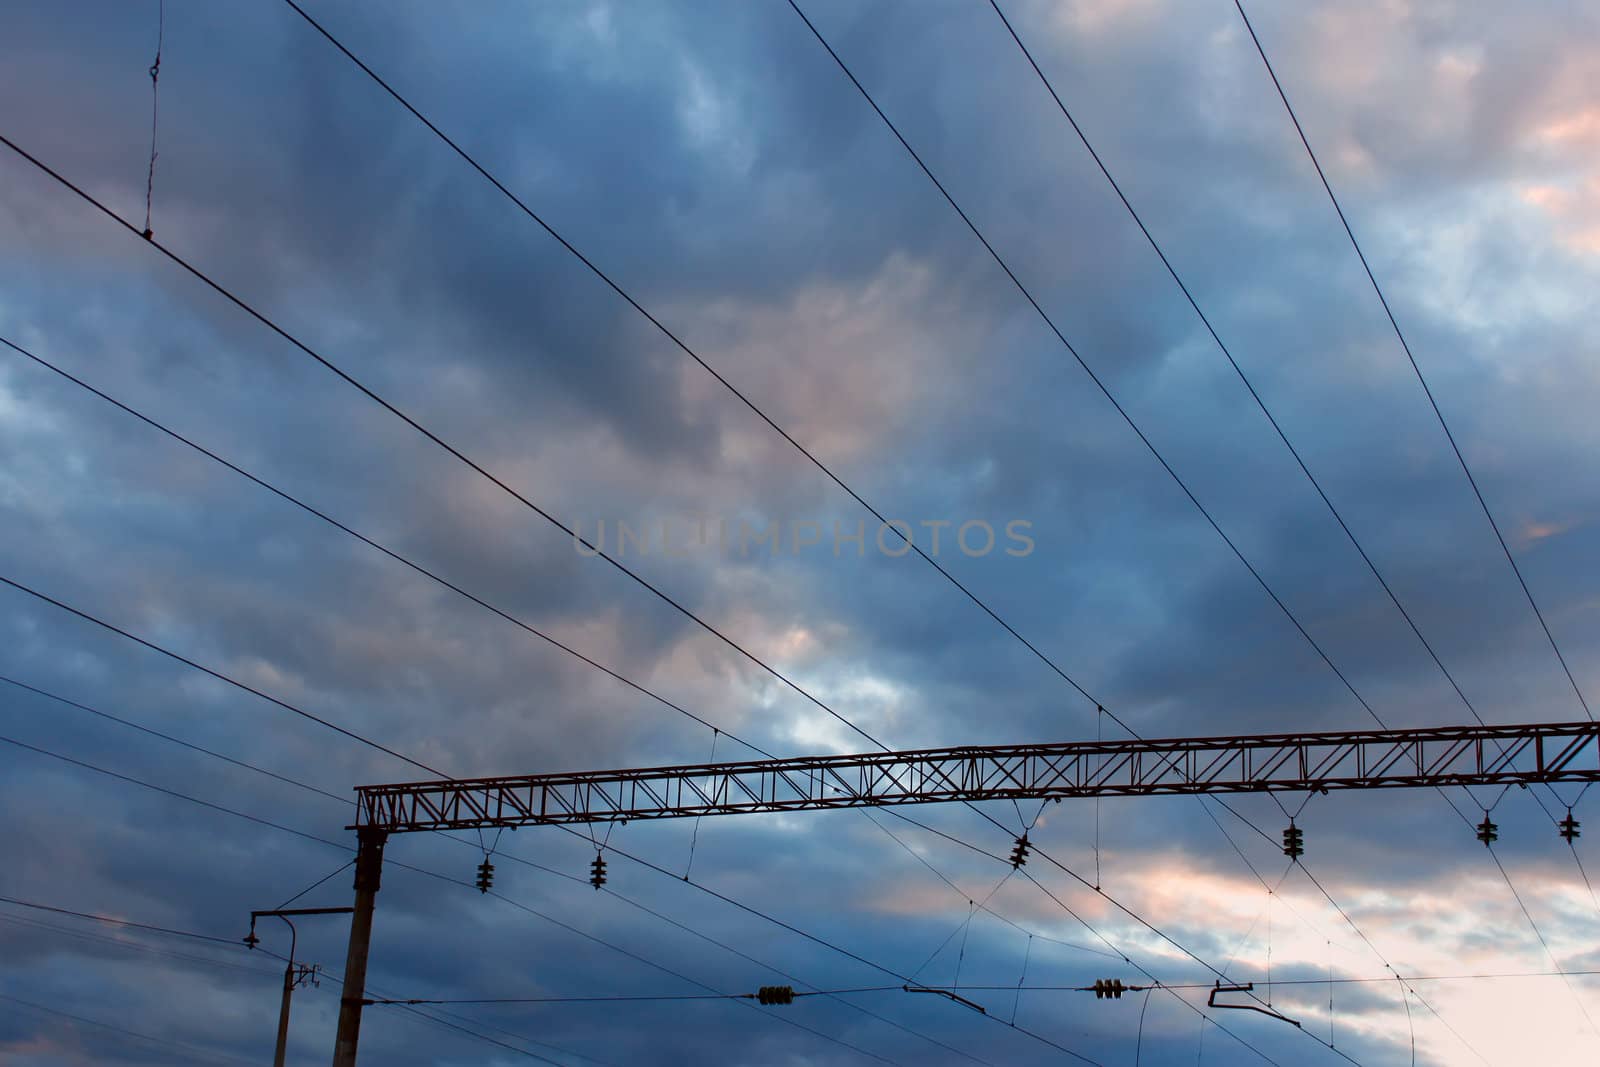 Power line of electric trains by qiiip